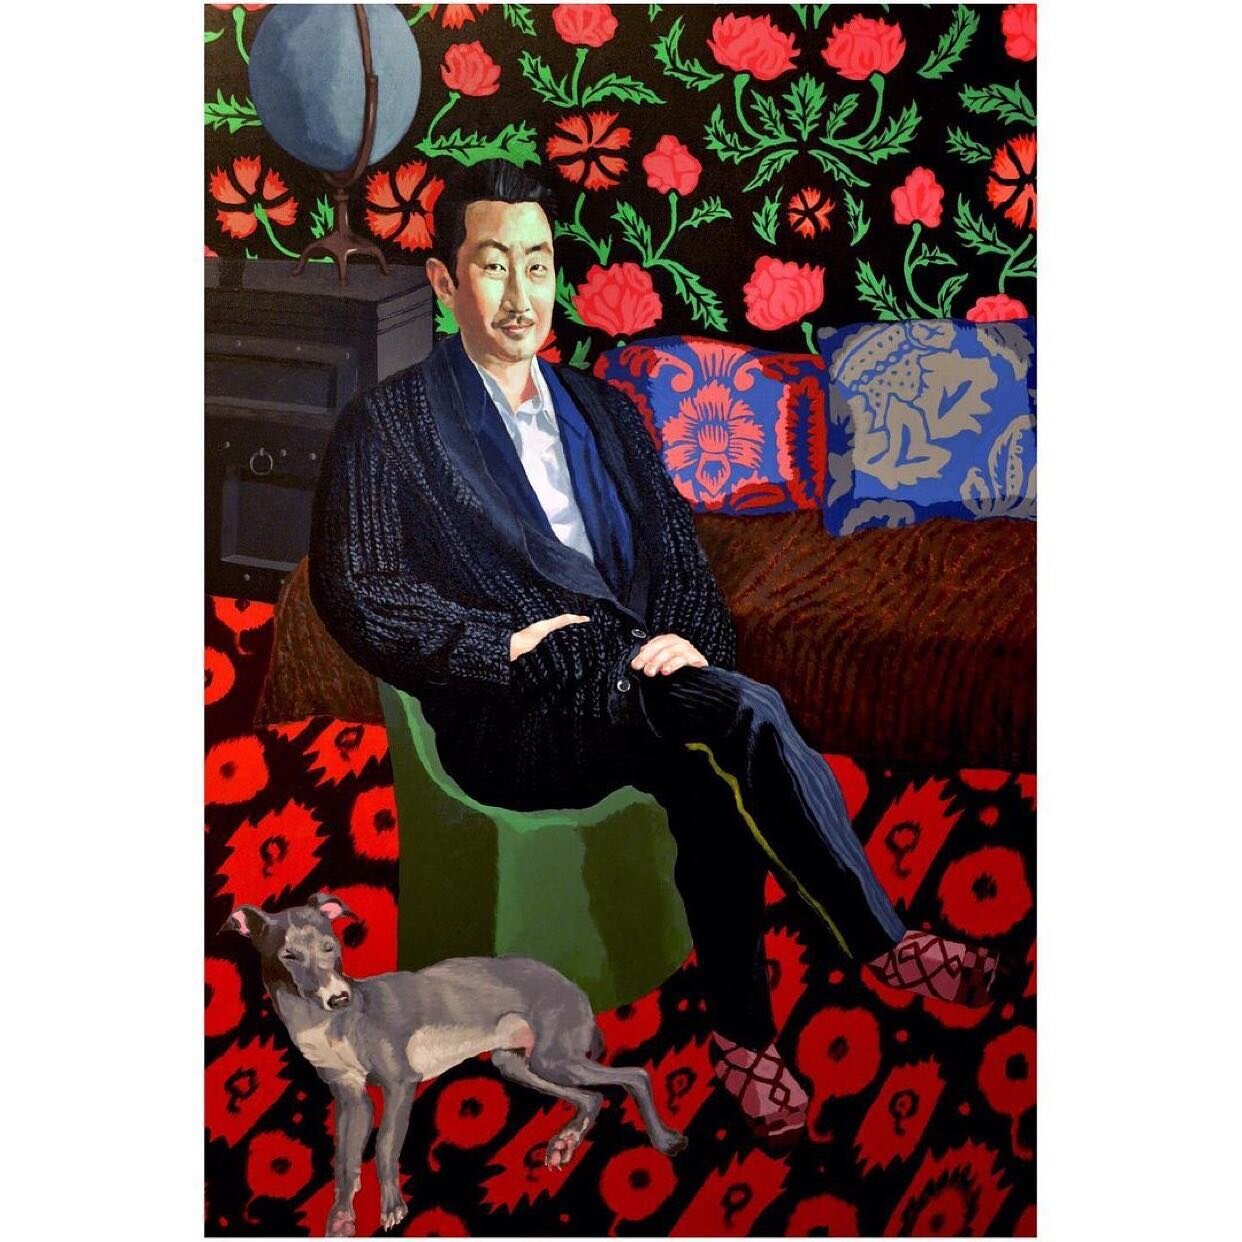 ARTIST BRUNO LEYDET @brunoleydetmtl from his first solo show in the US at Craven Contemporary. @cravencontemporary 
&bull;
Works from the show: 
1) &lsquo;Portrait de Juno et Lloyd&rsquo;, 2017; 
2) &lsquo;Quadrille&rsquo;, 2018; 
3) &lsquo;Sphynx&rs